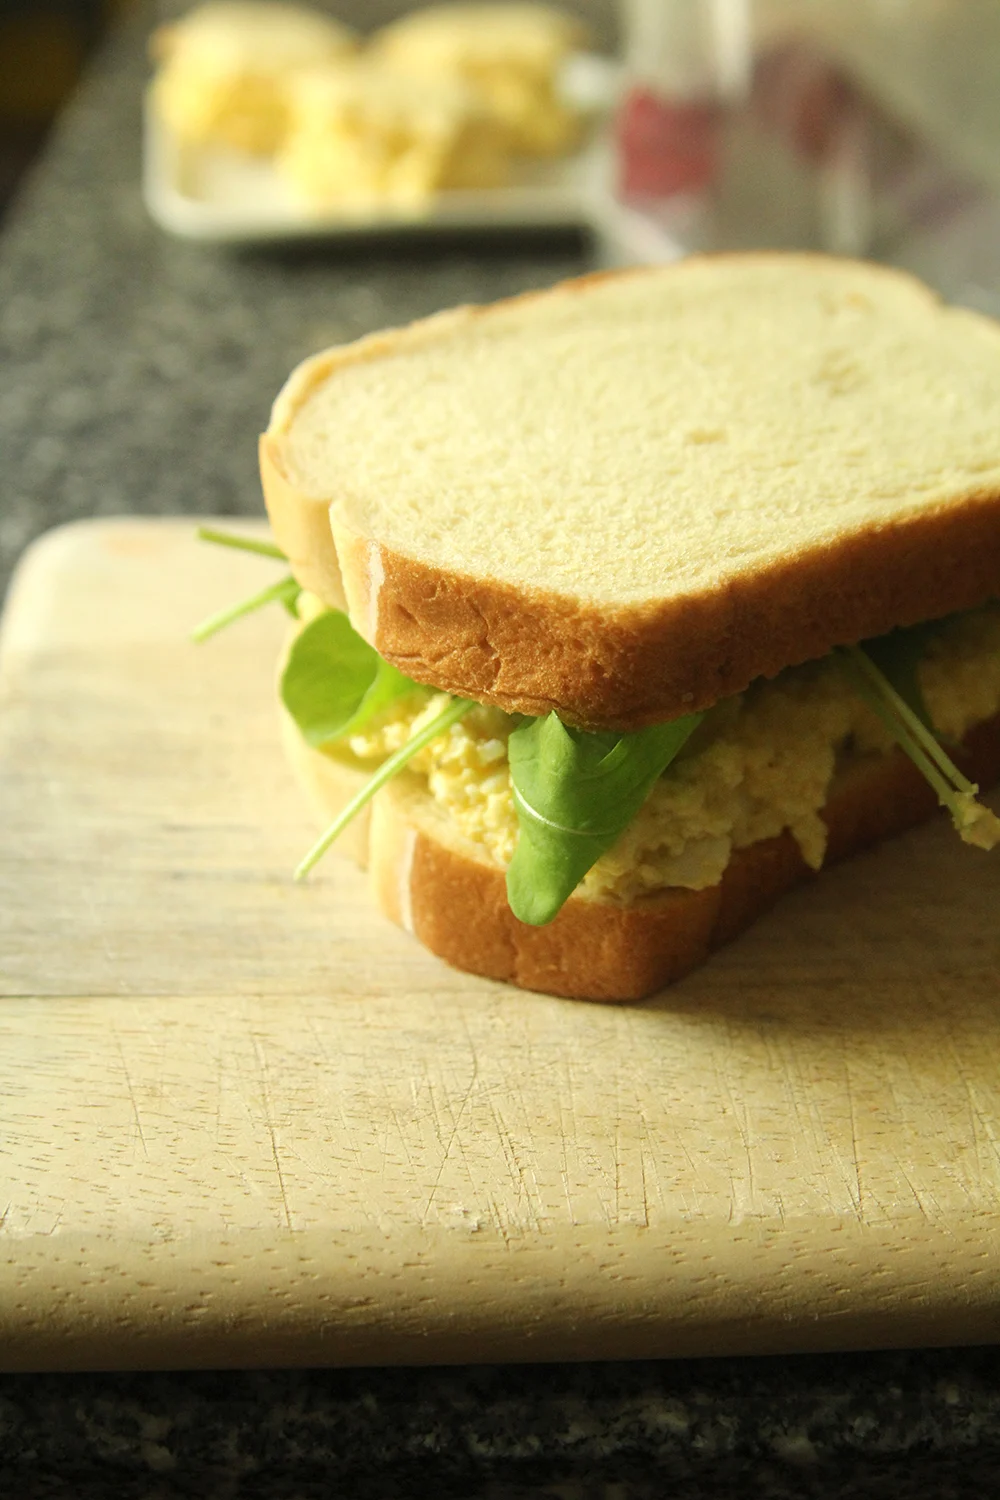 A sandwich made with egg salad is shown on a cutting board. Green baby arugula pokes out in all directions.